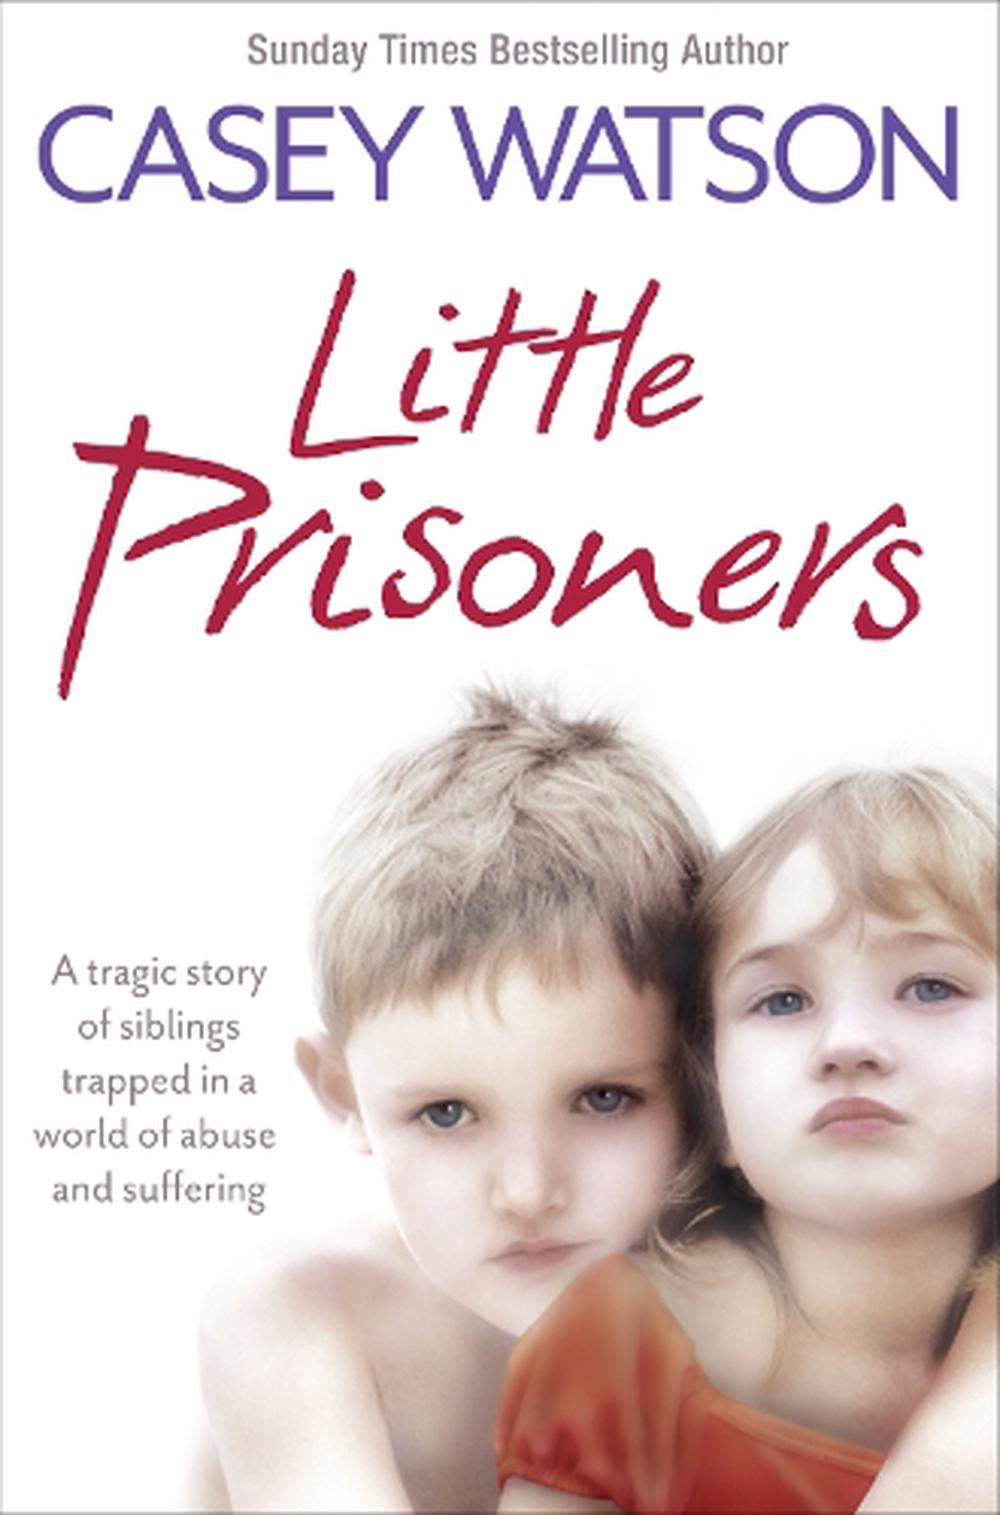 Little Prisoners by Casey Watson, 9780007436606 Buy online at The Nile